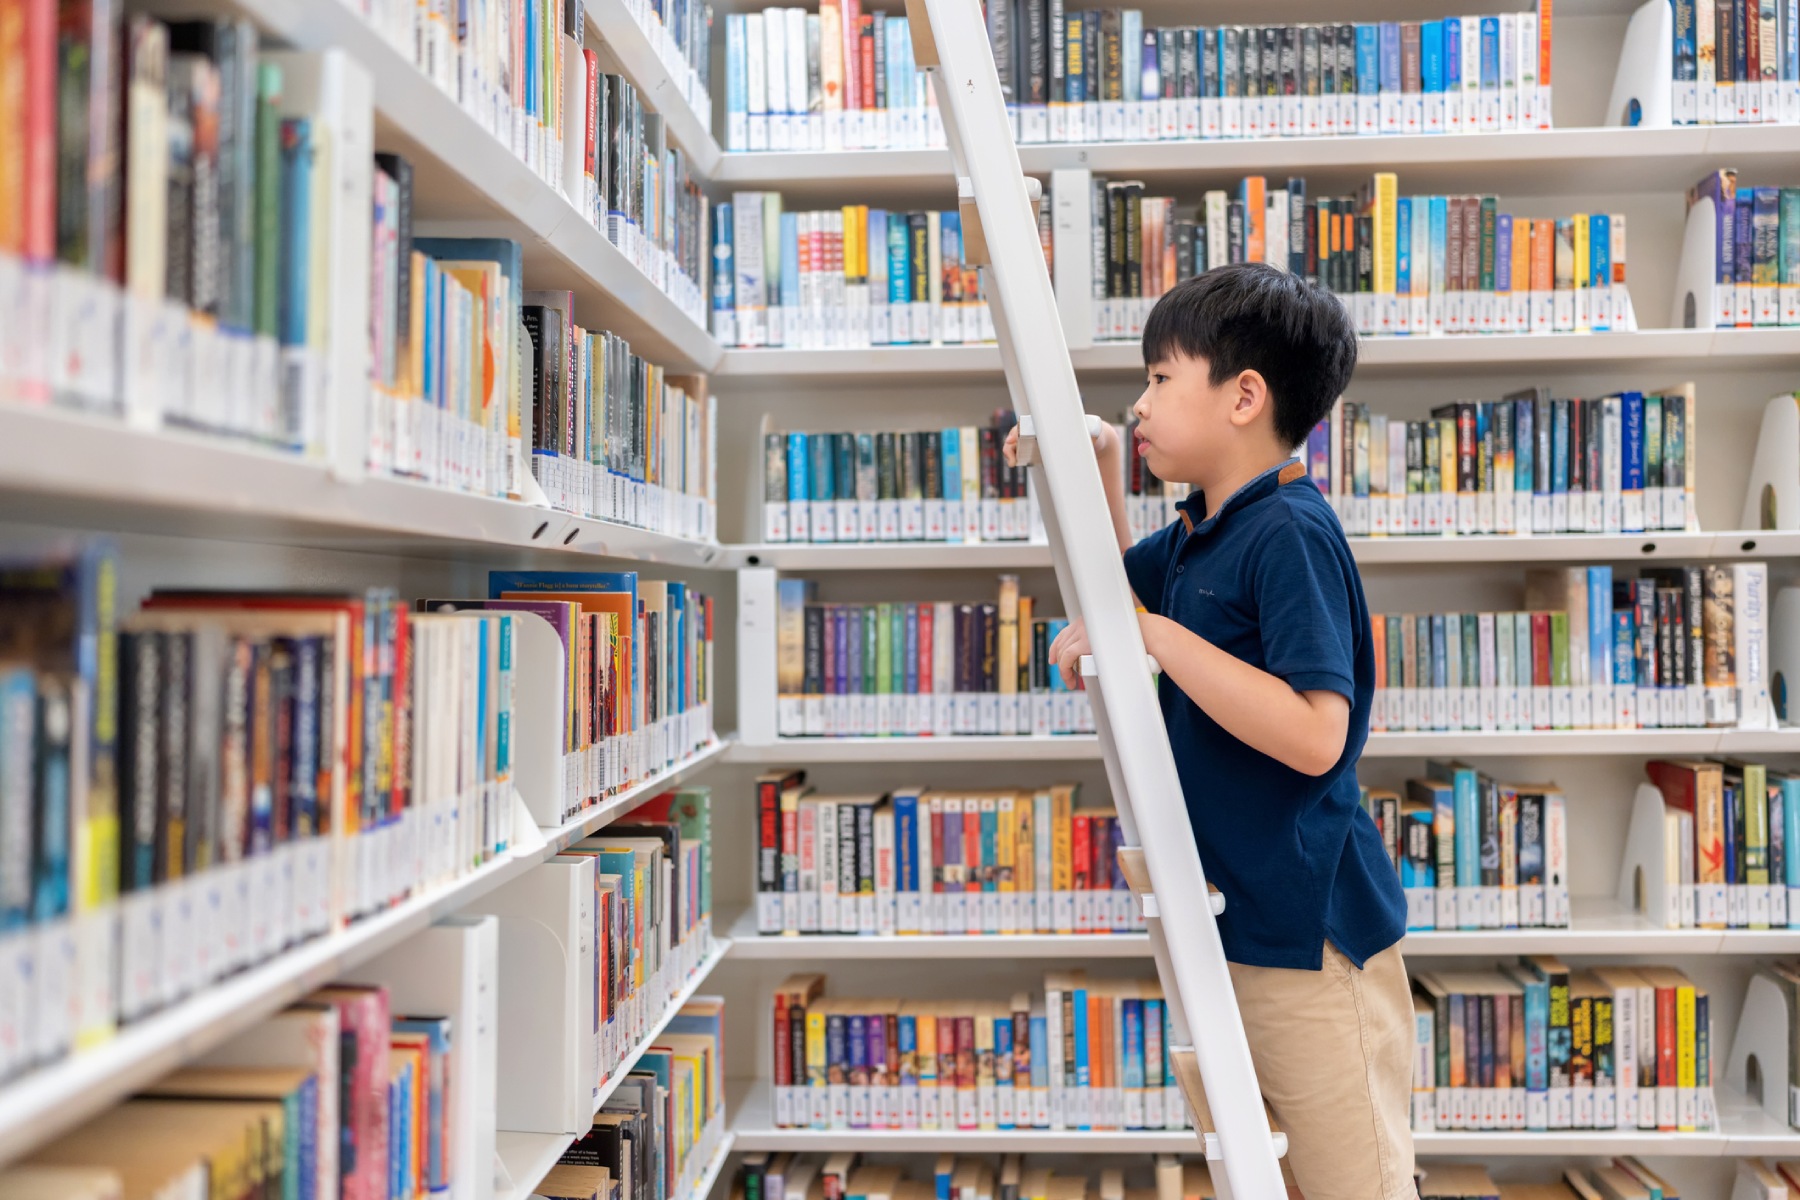 A young boy climbing a ladder to choose a book from a shelf in a school library.